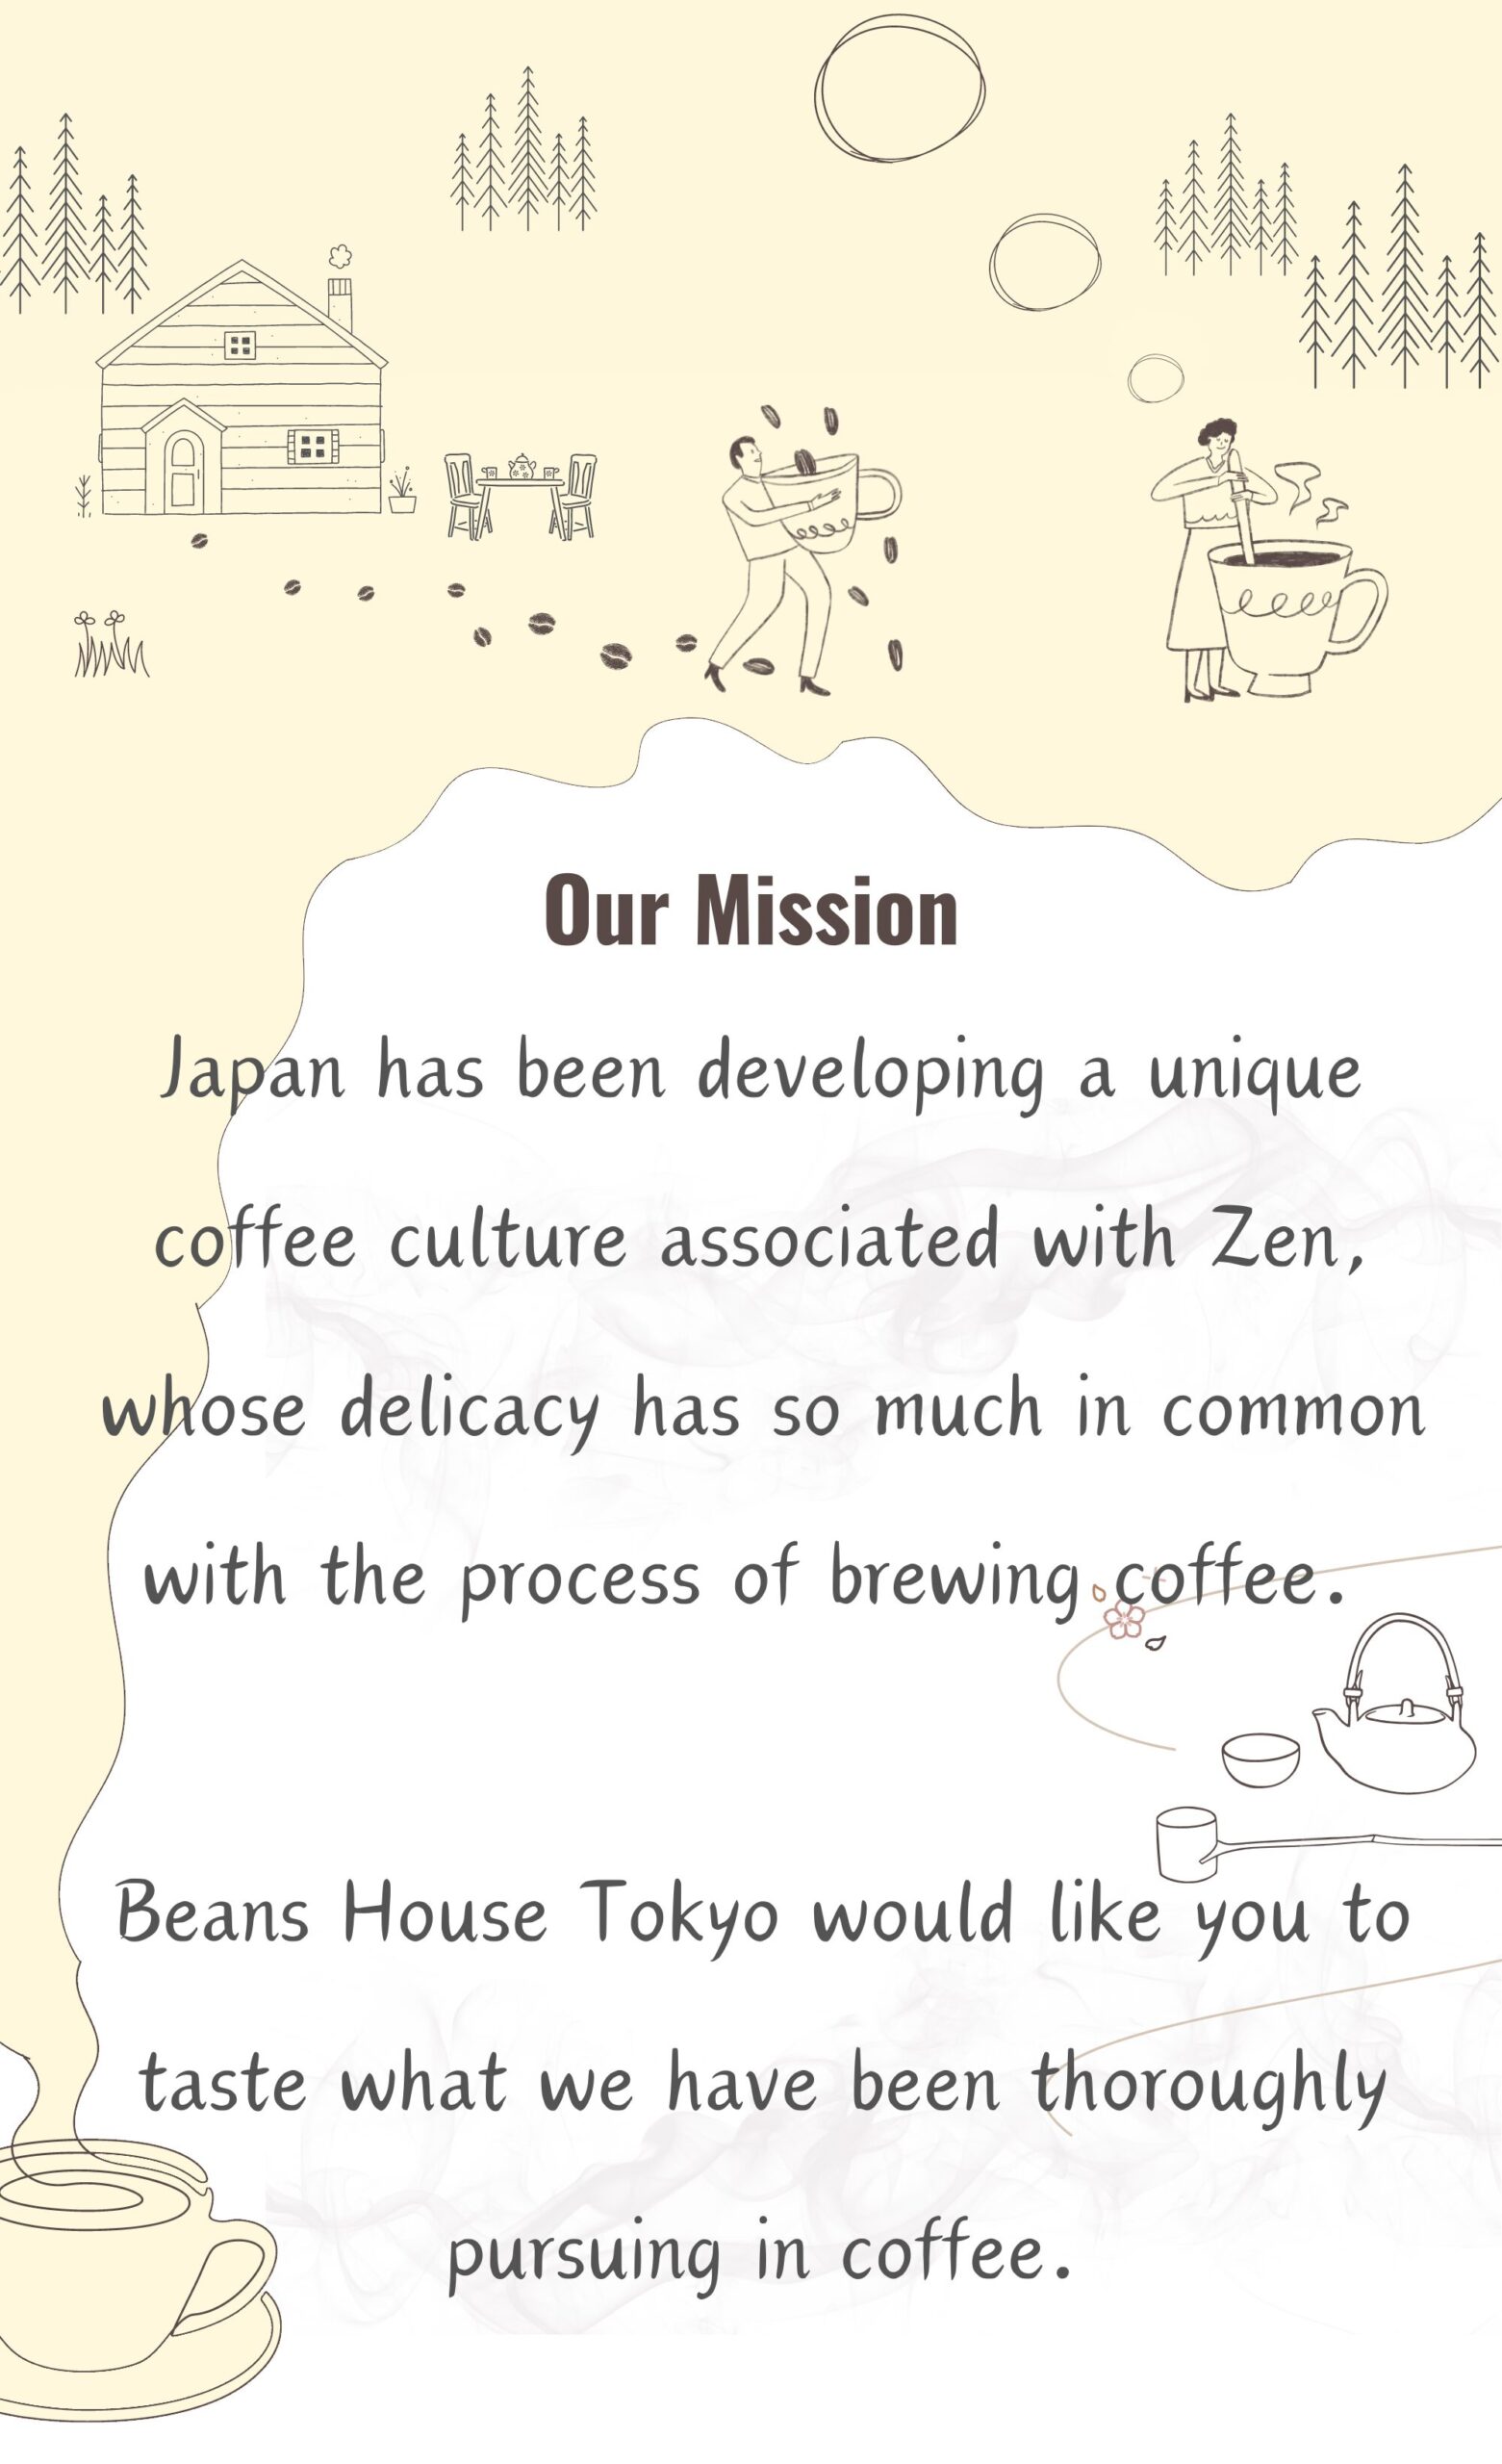 Beans House Tokyo Mission